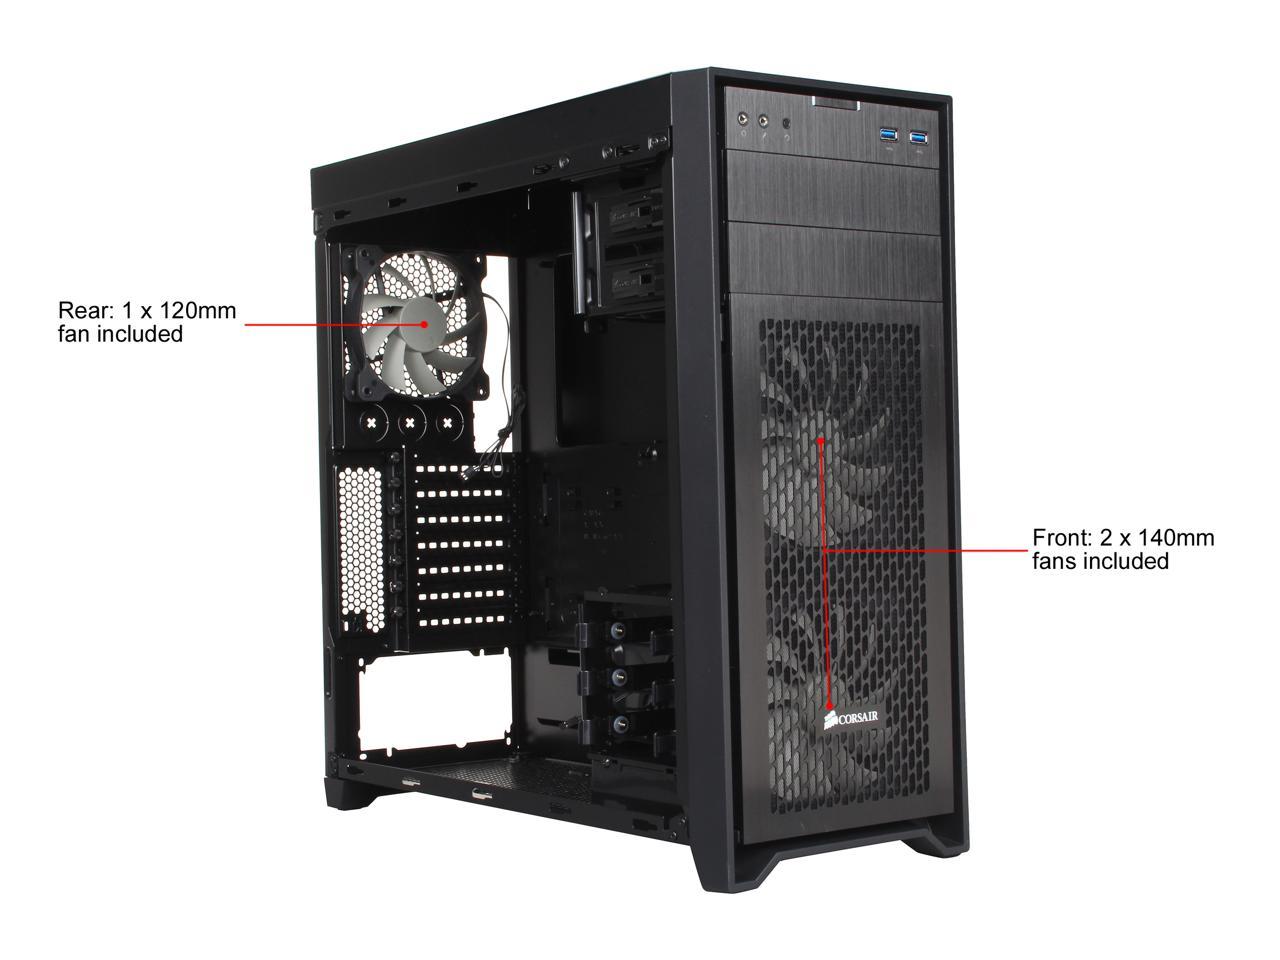 Corsair Obsidian Series 450D Black Brushed Aluminum and Steel Mid Tower Gaming Computer - Newegg.com